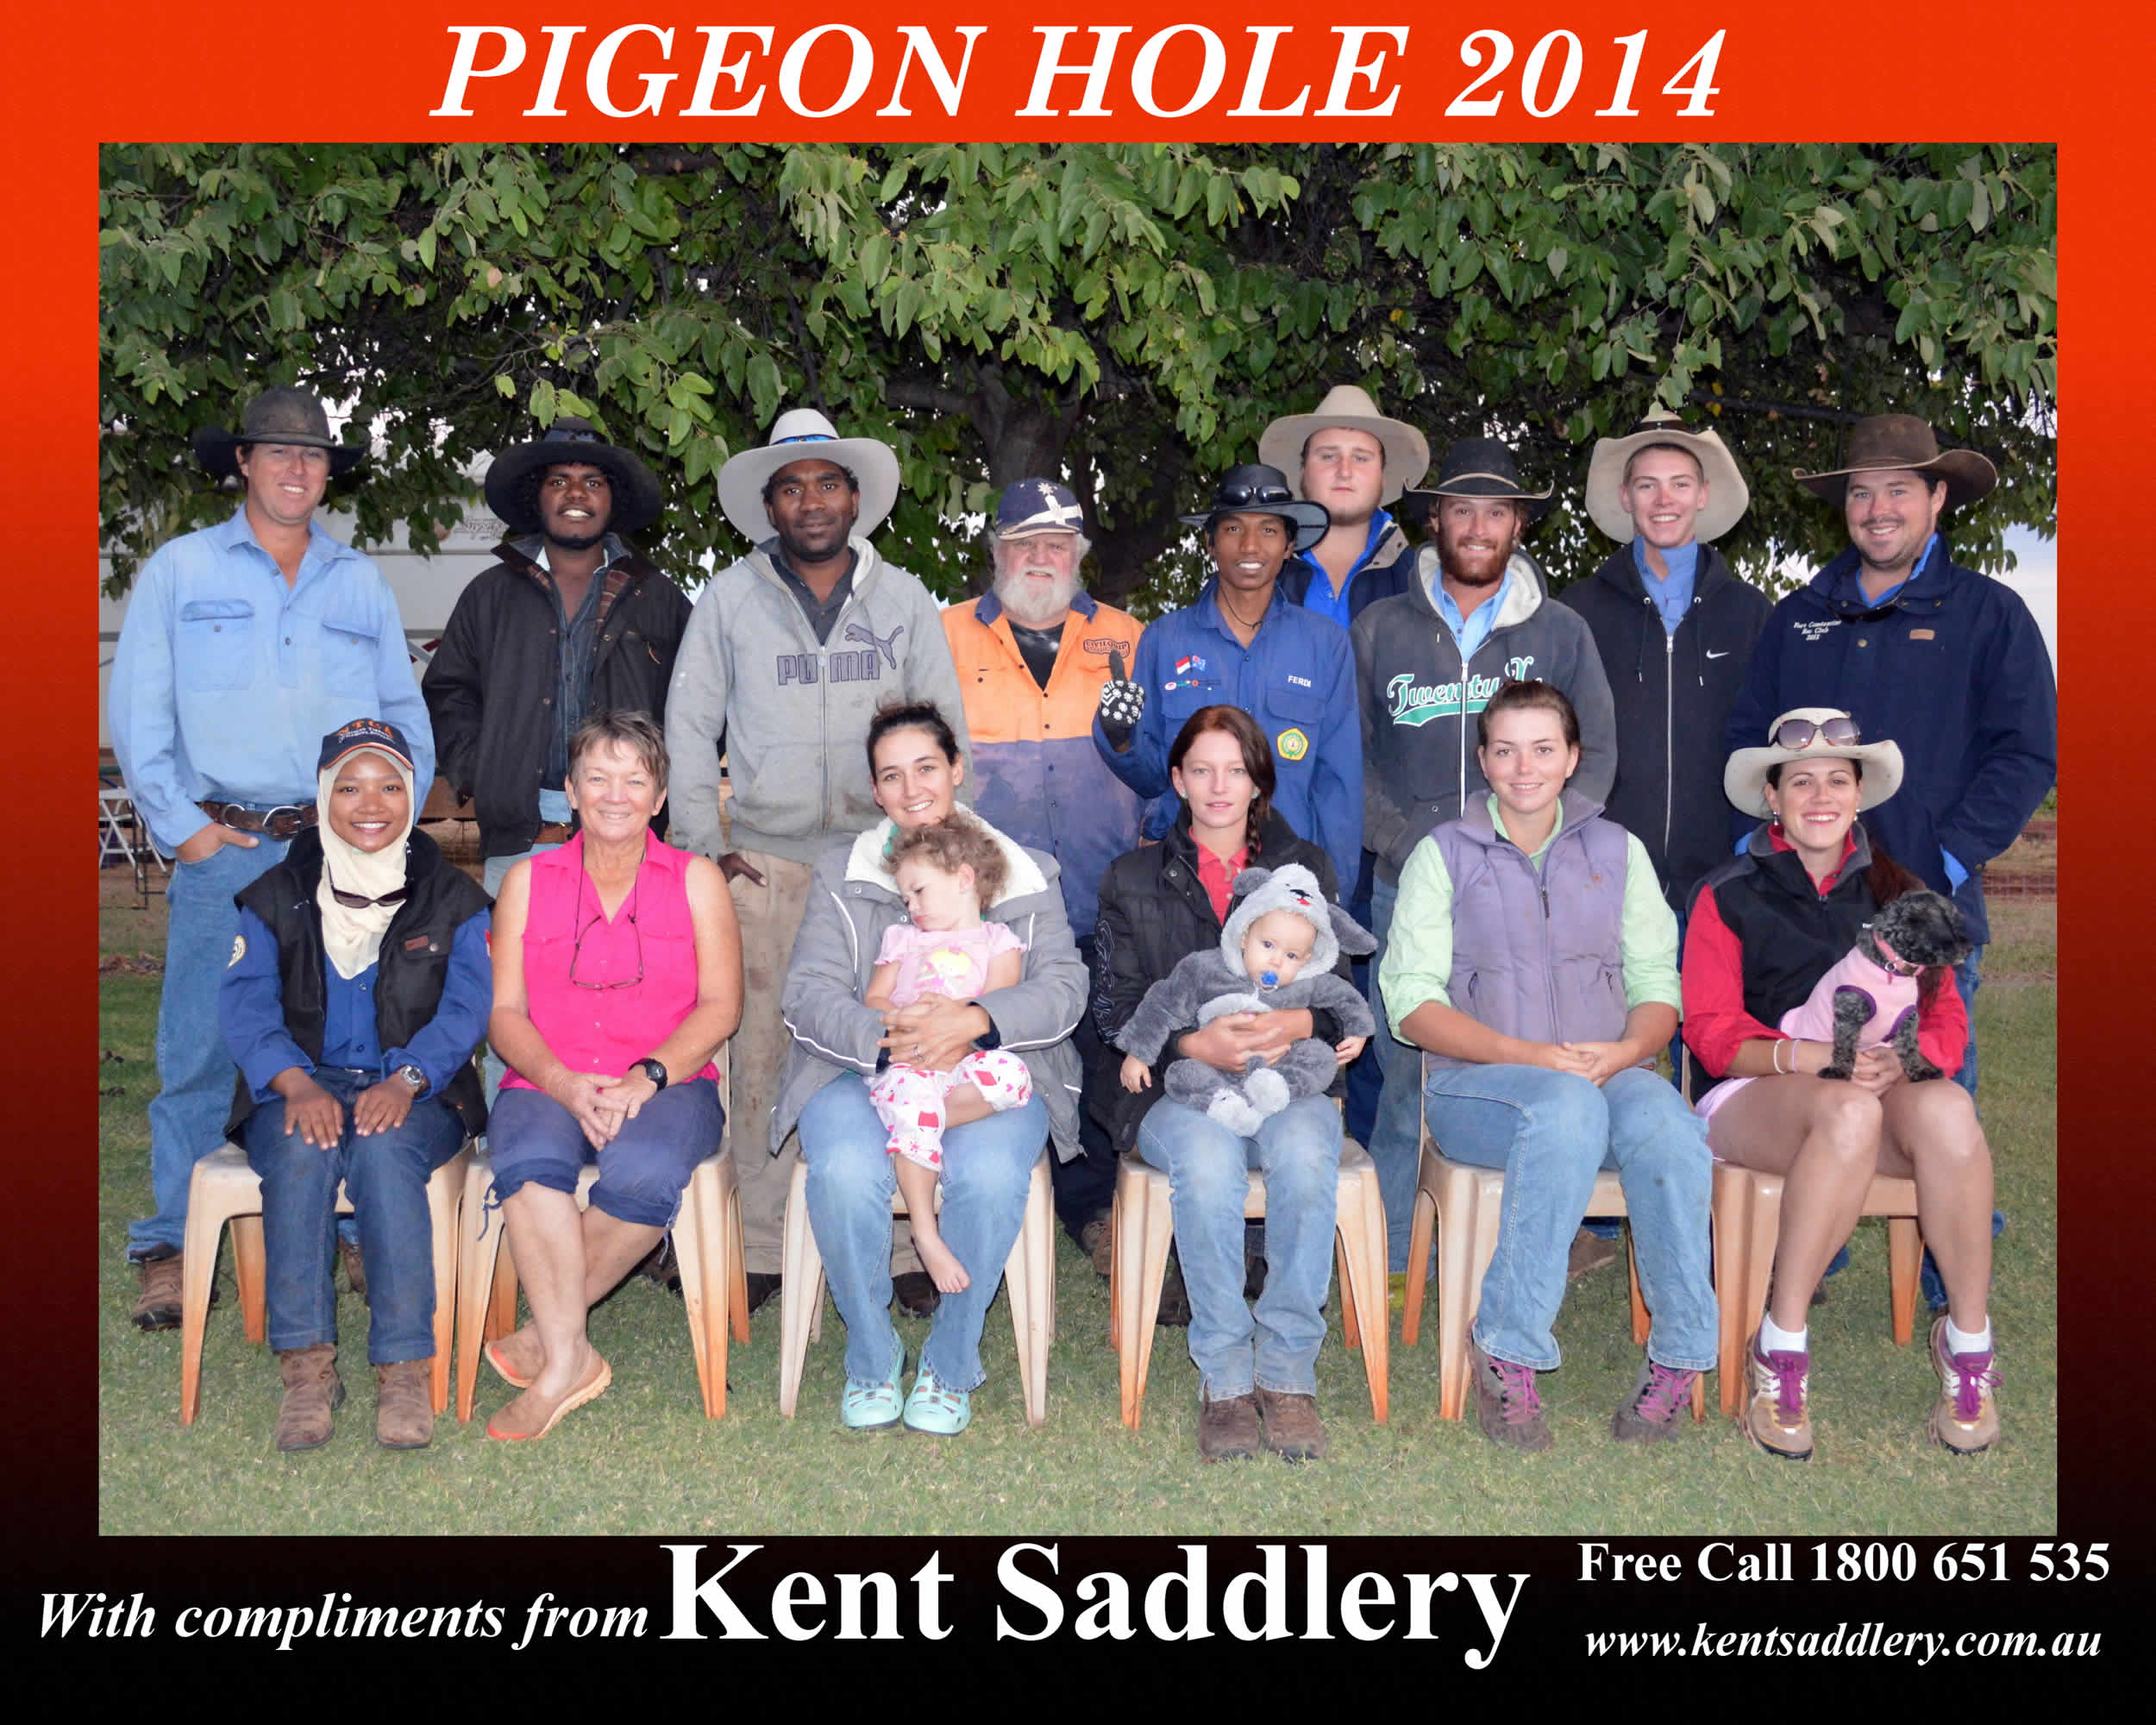 Northern Territory - Pigeon Hole 20